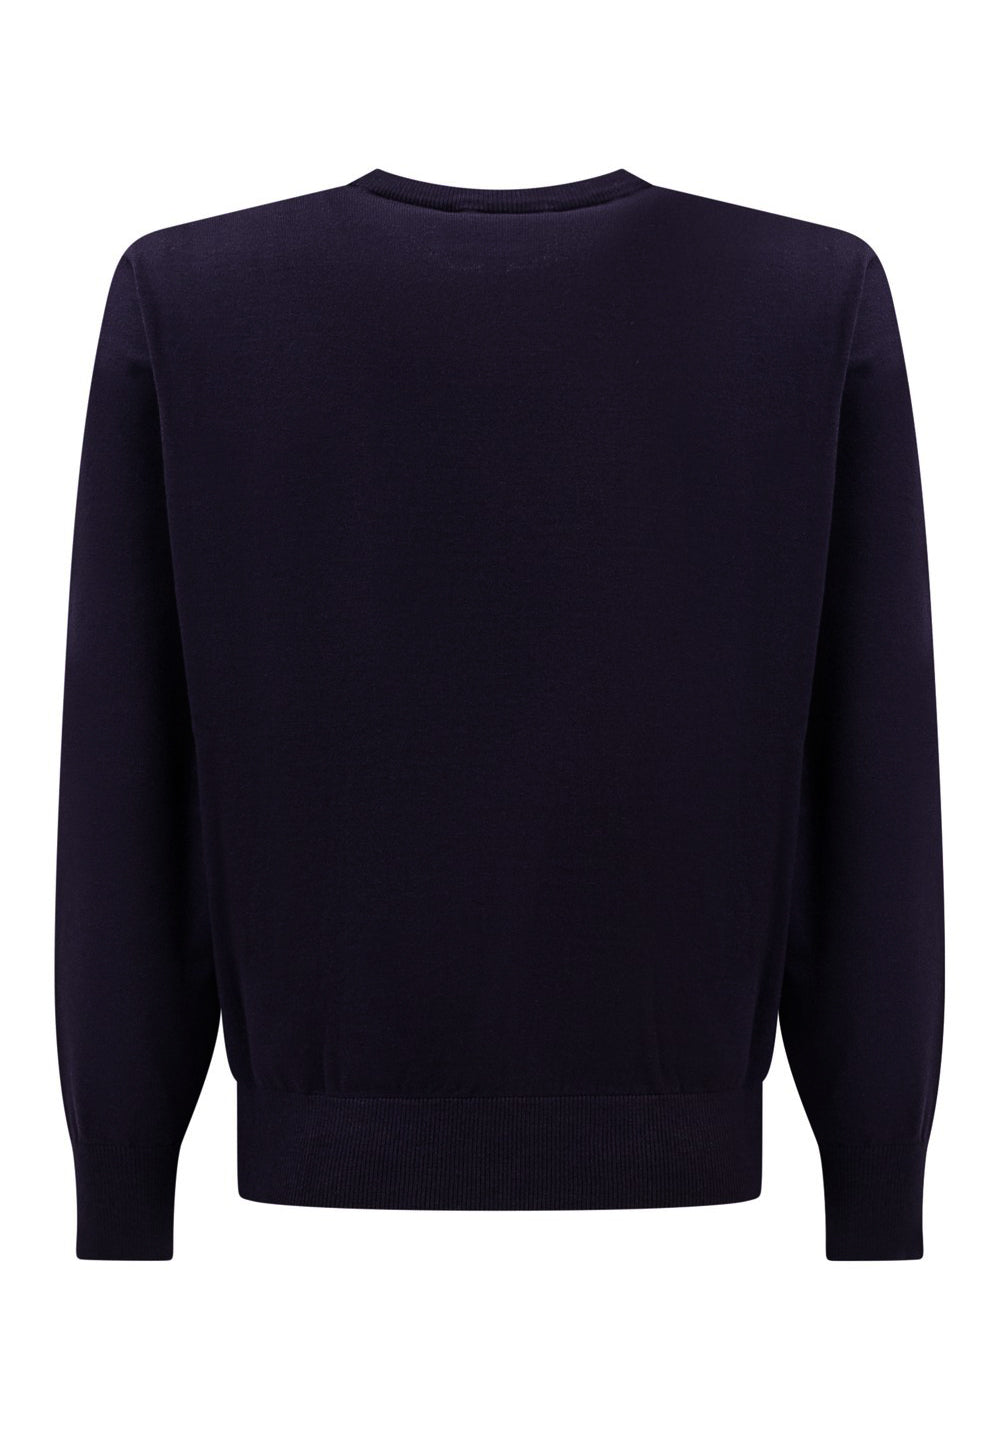 Navy blue sweater for boys